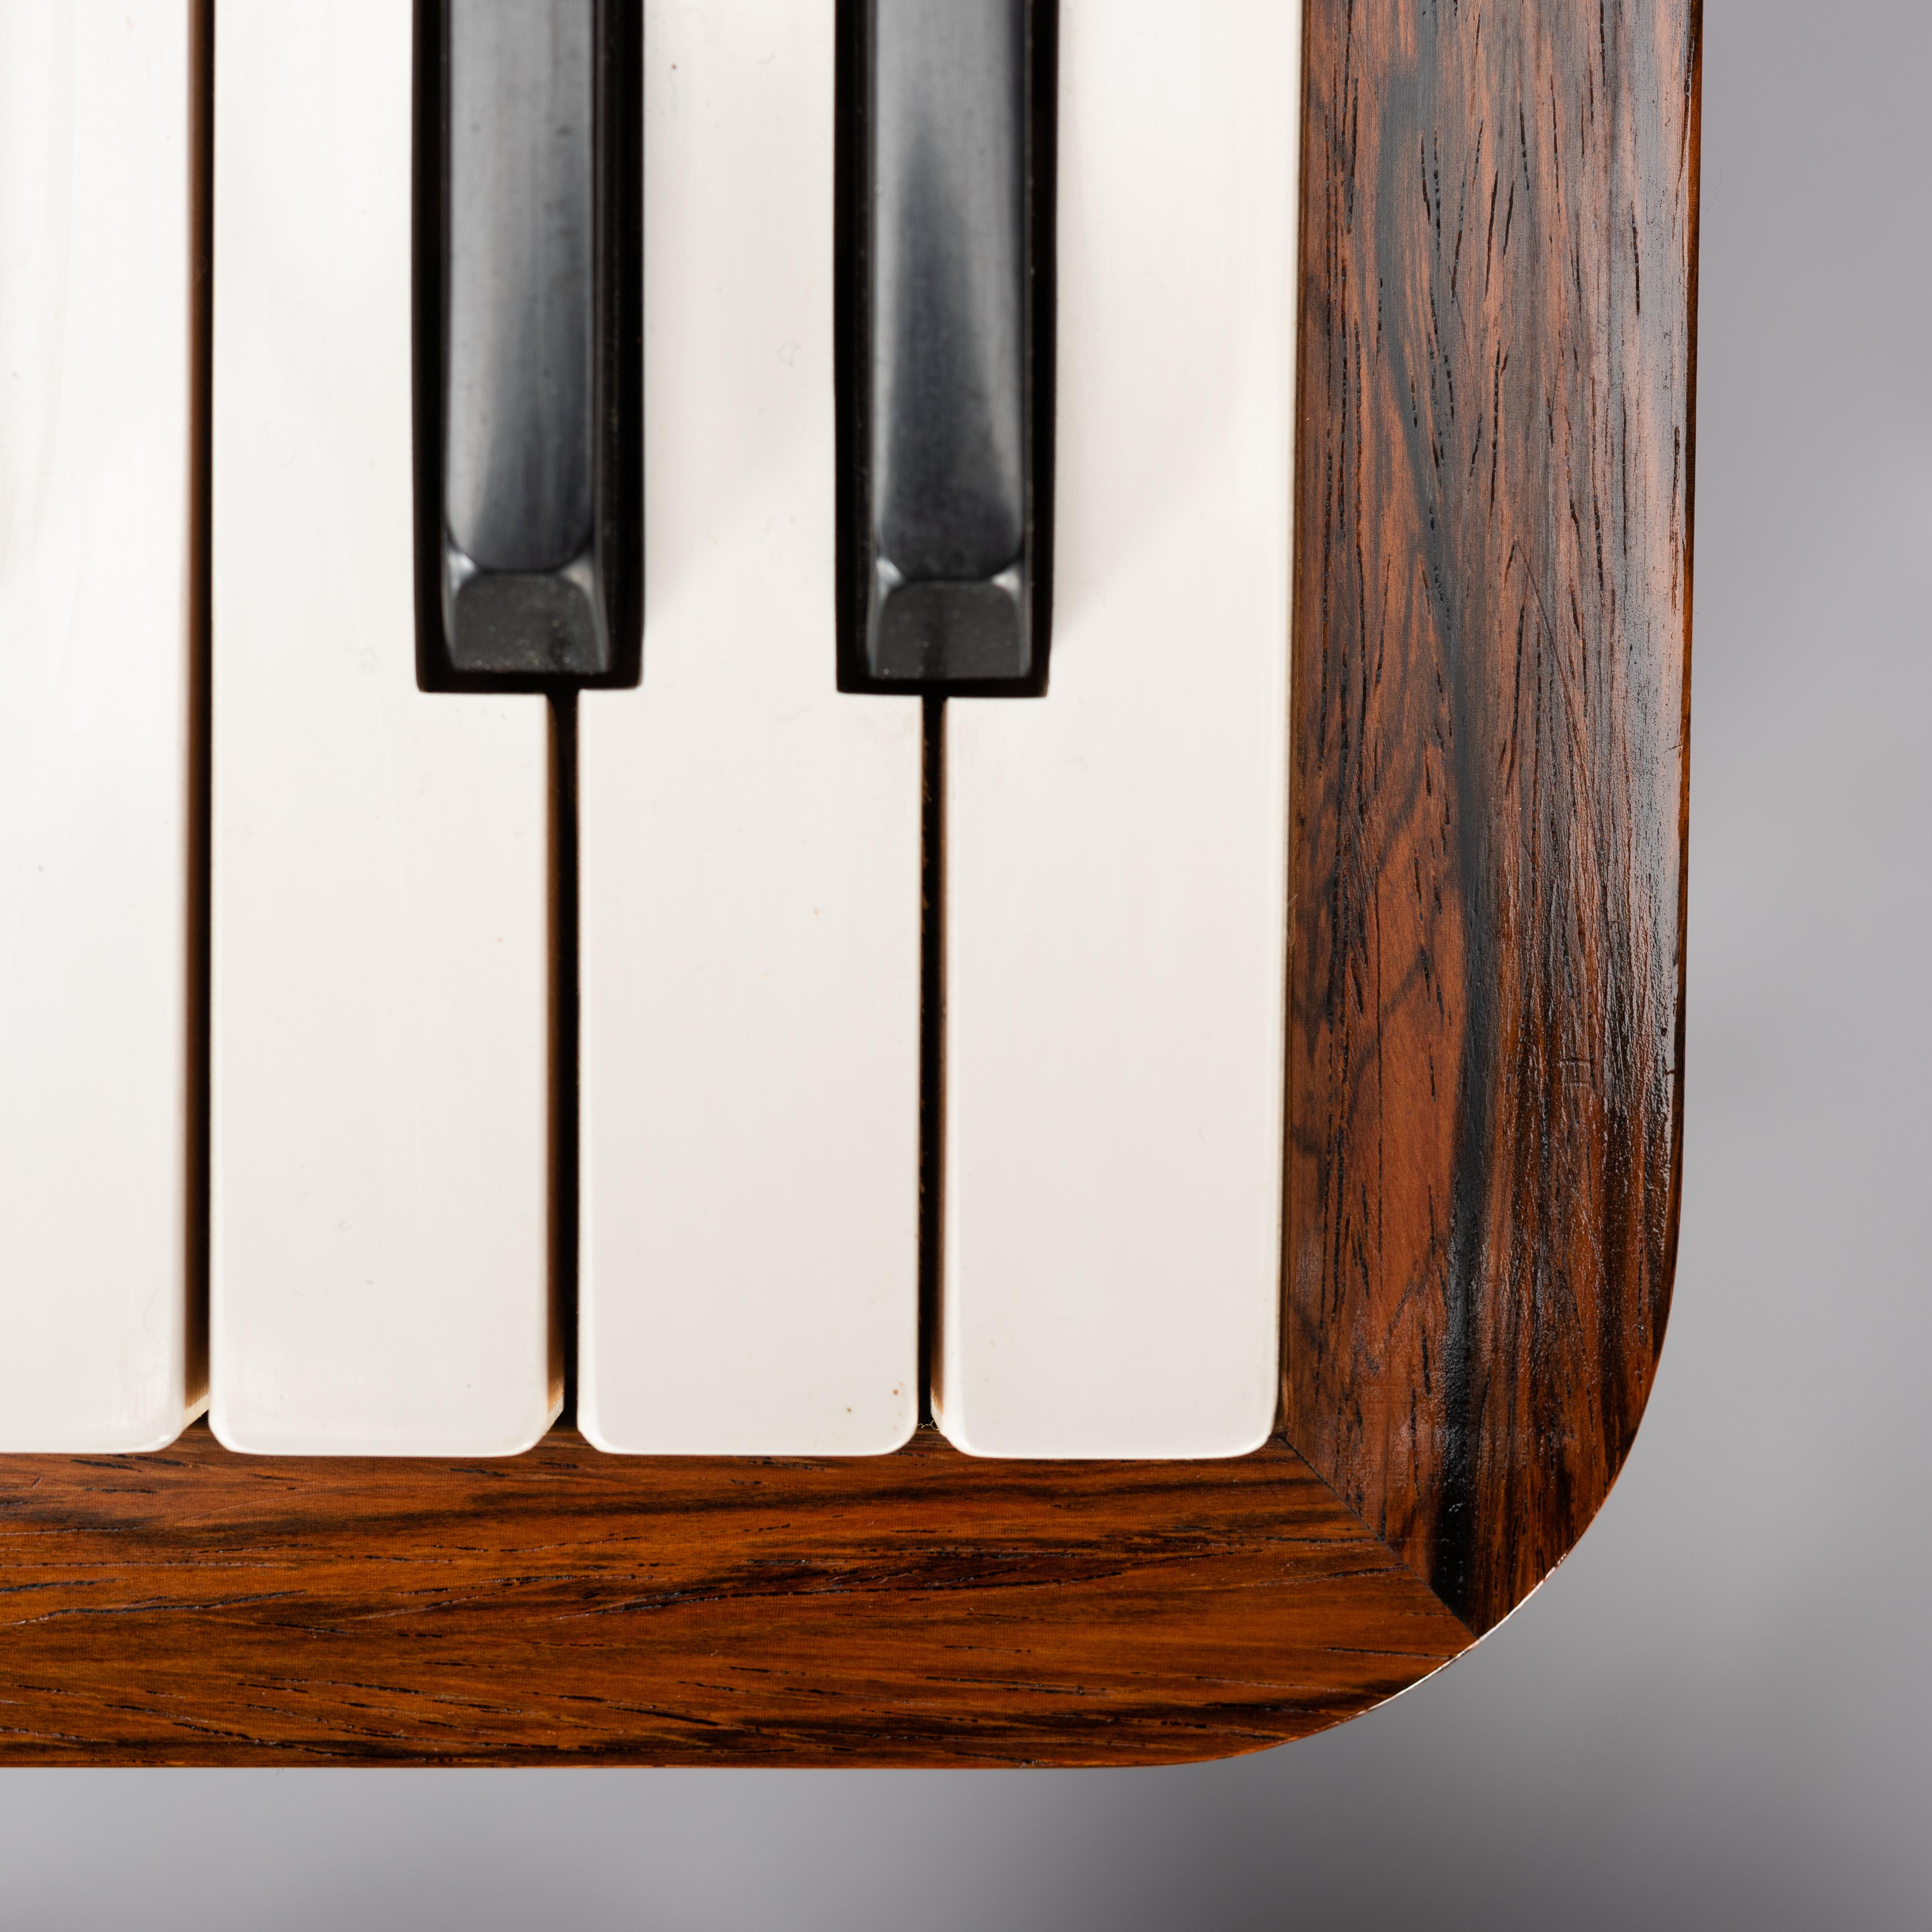 Danish Midcentury Pianette by Louis Zwicki in Expressive Rosewood, 1950s 4